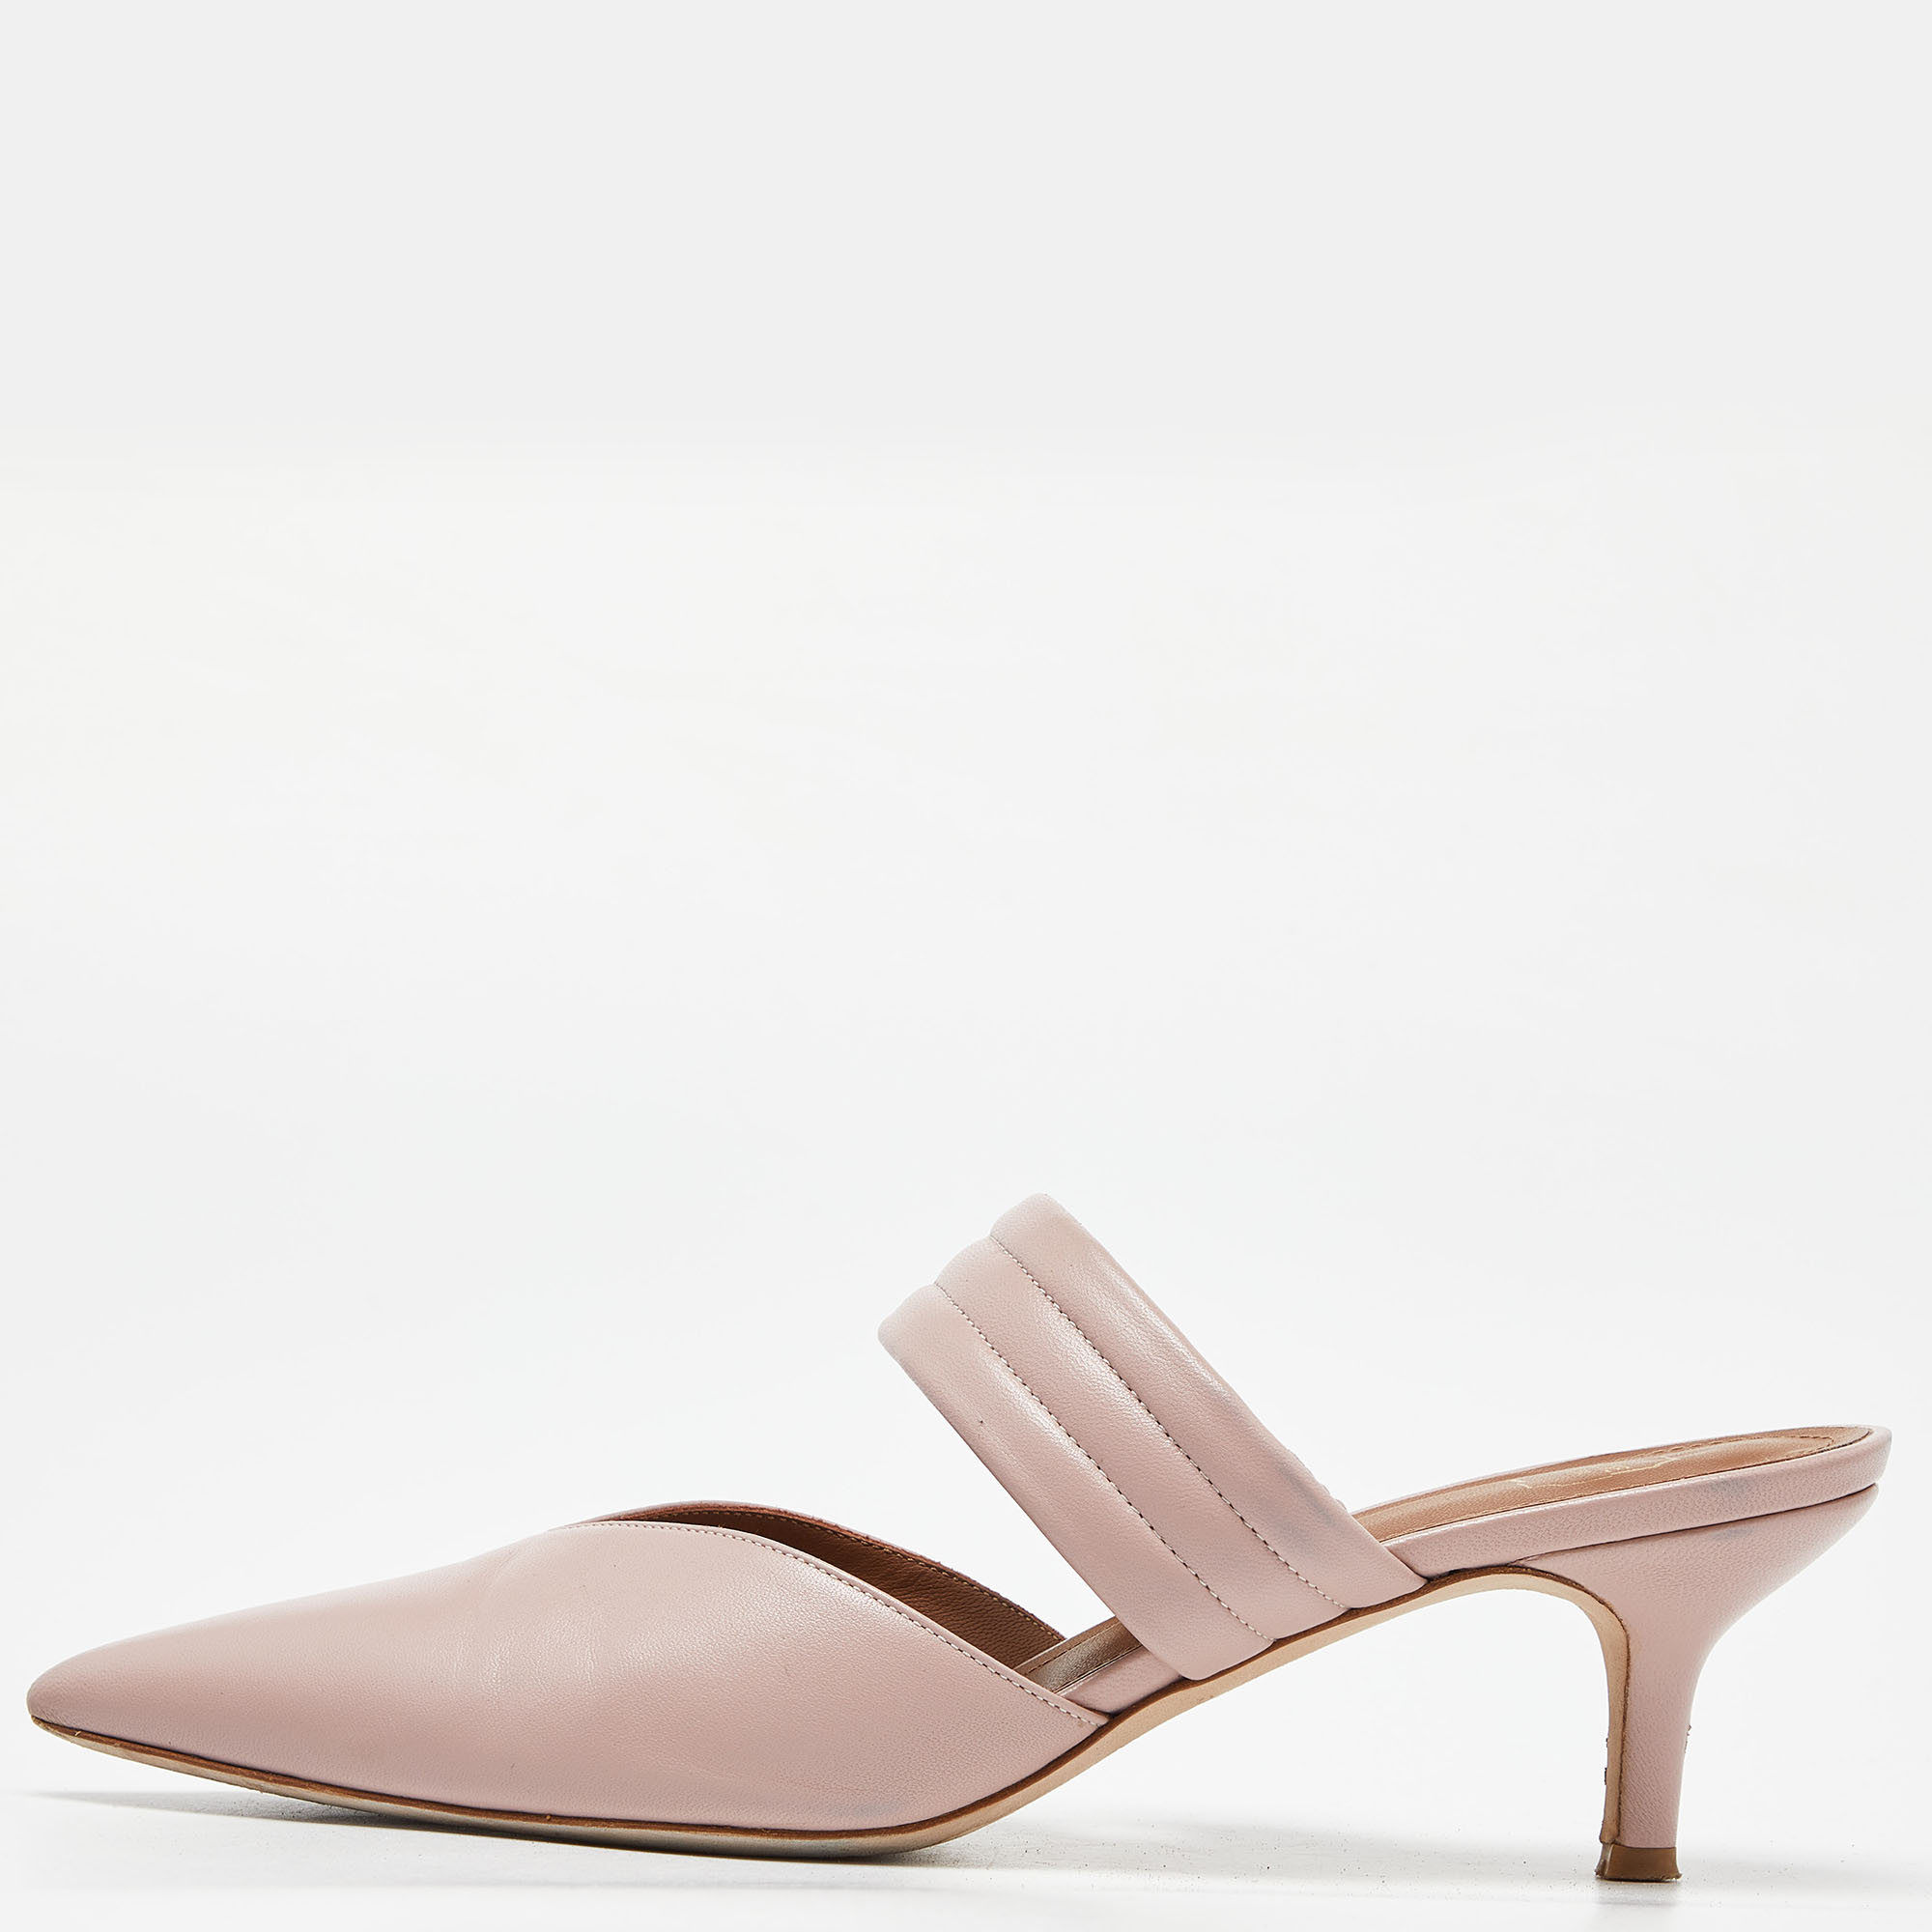 A perfect blend of luxury style and comfort these designer mules are made using quality materials and frame your feet in the most elegant way. They can be paired with a host of outfits from your wardrobe.